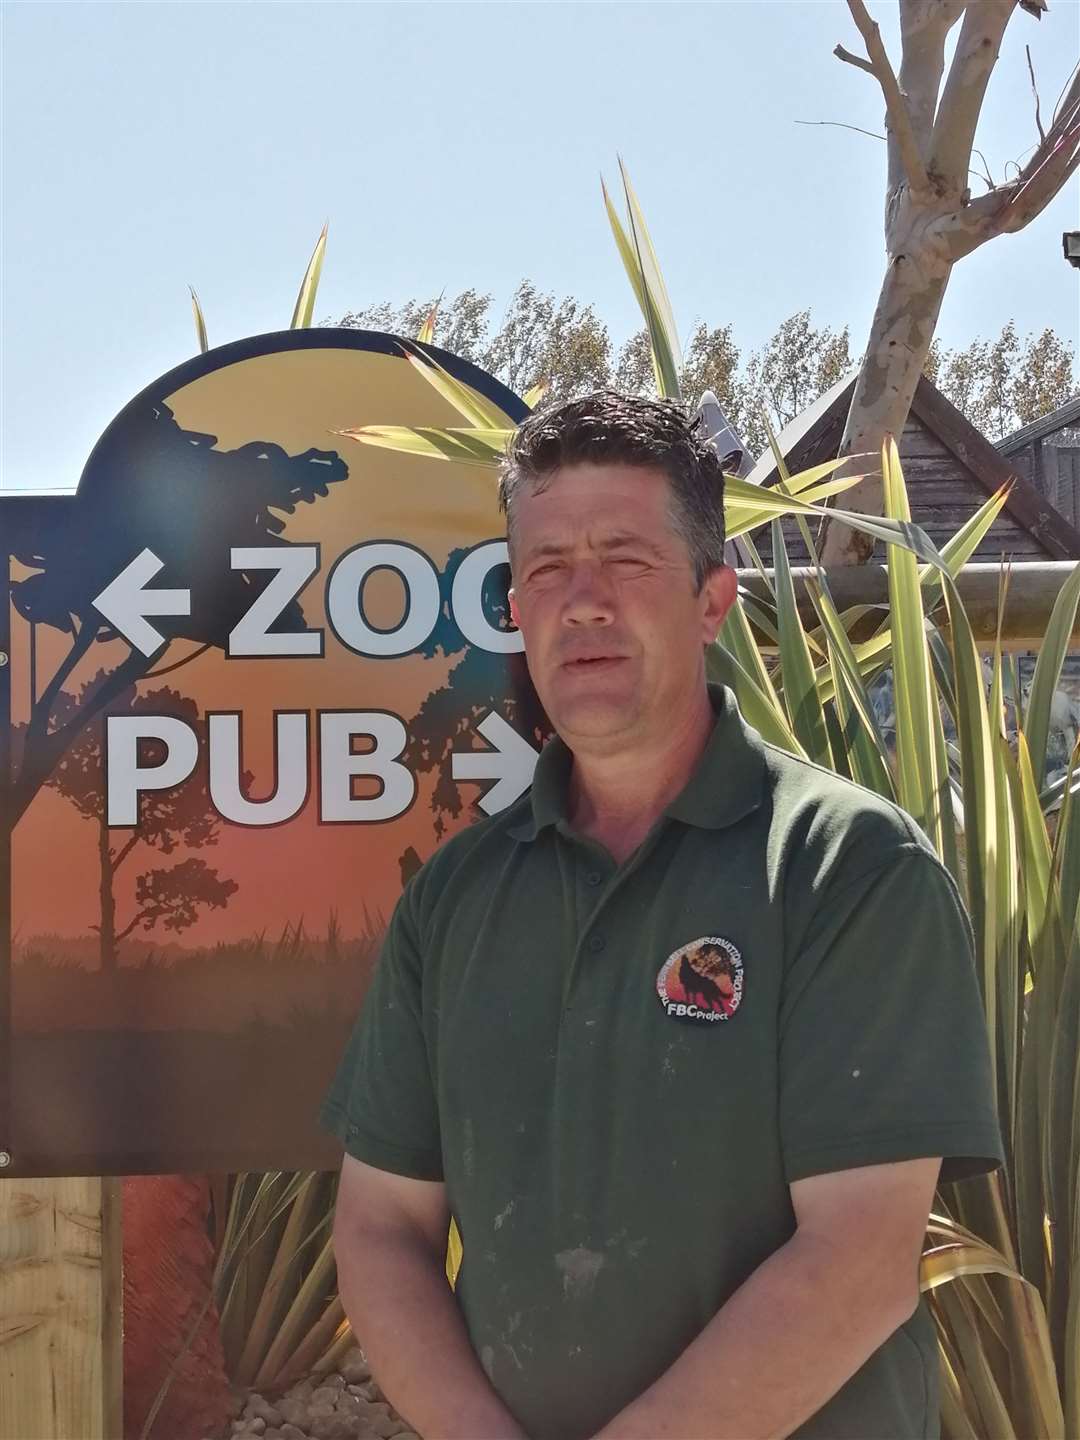 Andy Cowell, owner of The Fenn Bell Zoo and pub in St Mary Hoo, Rochester